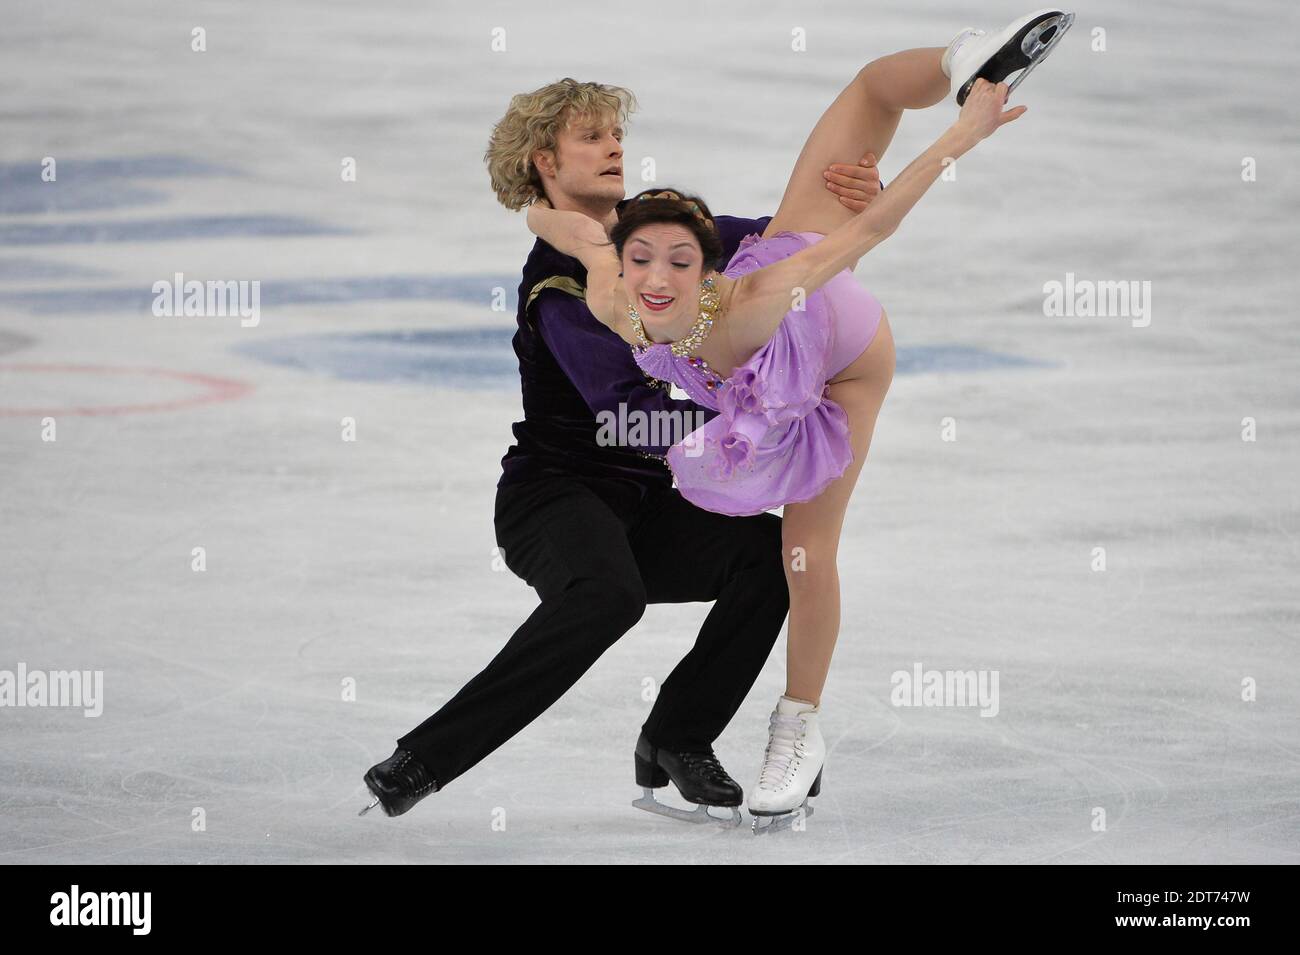 Winter Olympics 2014 figure skating schedule: Meryl Davis, Charlie White  looking for Olympic gold 